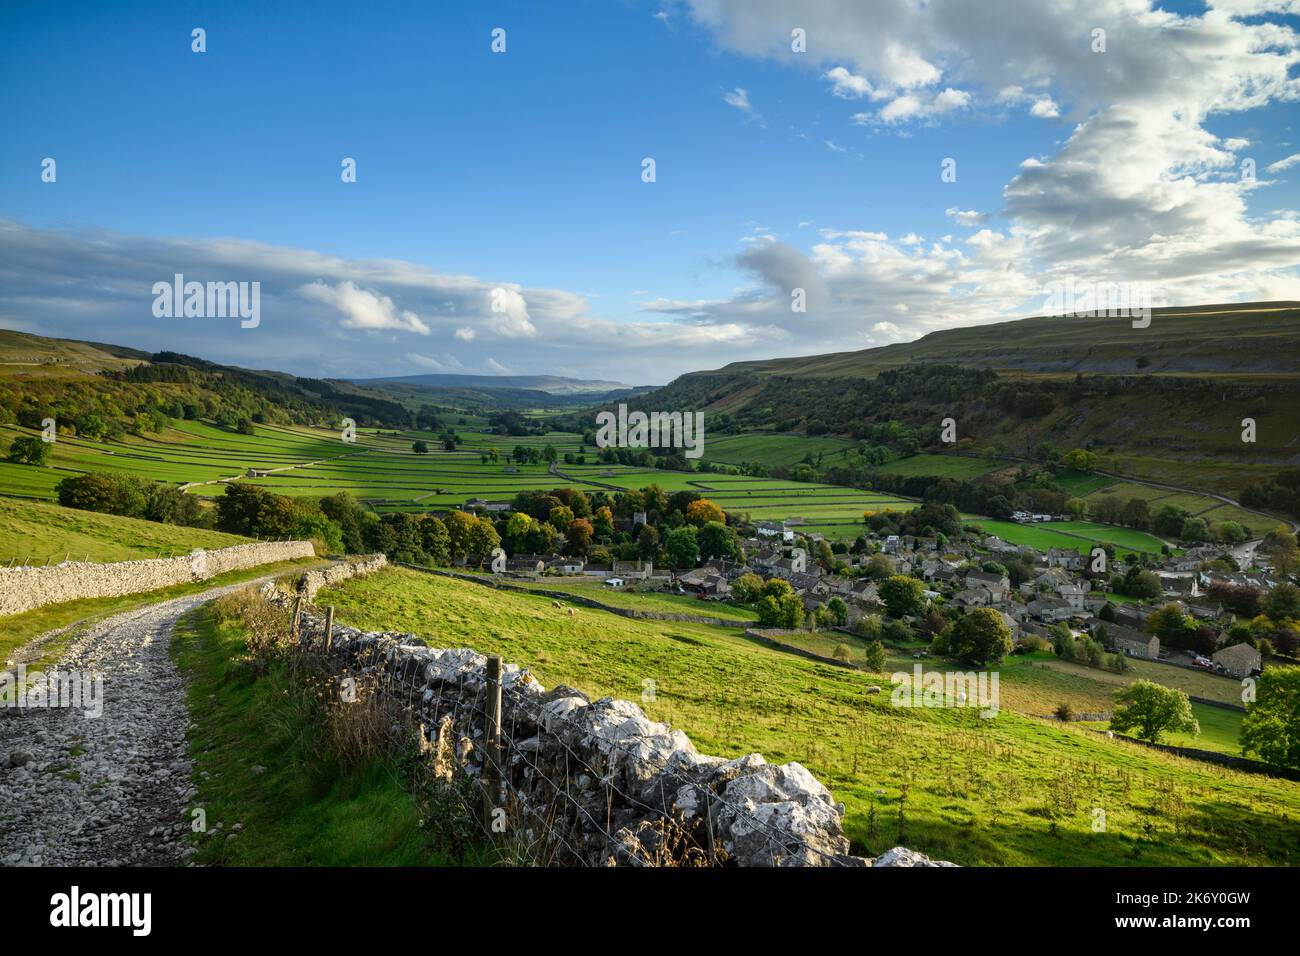 Picturesque Dales view (wide sunlit u-shaped valley, steep hillside slopes, cottages & houses, dramatic blue sky) - Kettlewell, Yorkshire, England UK. Stock Photo